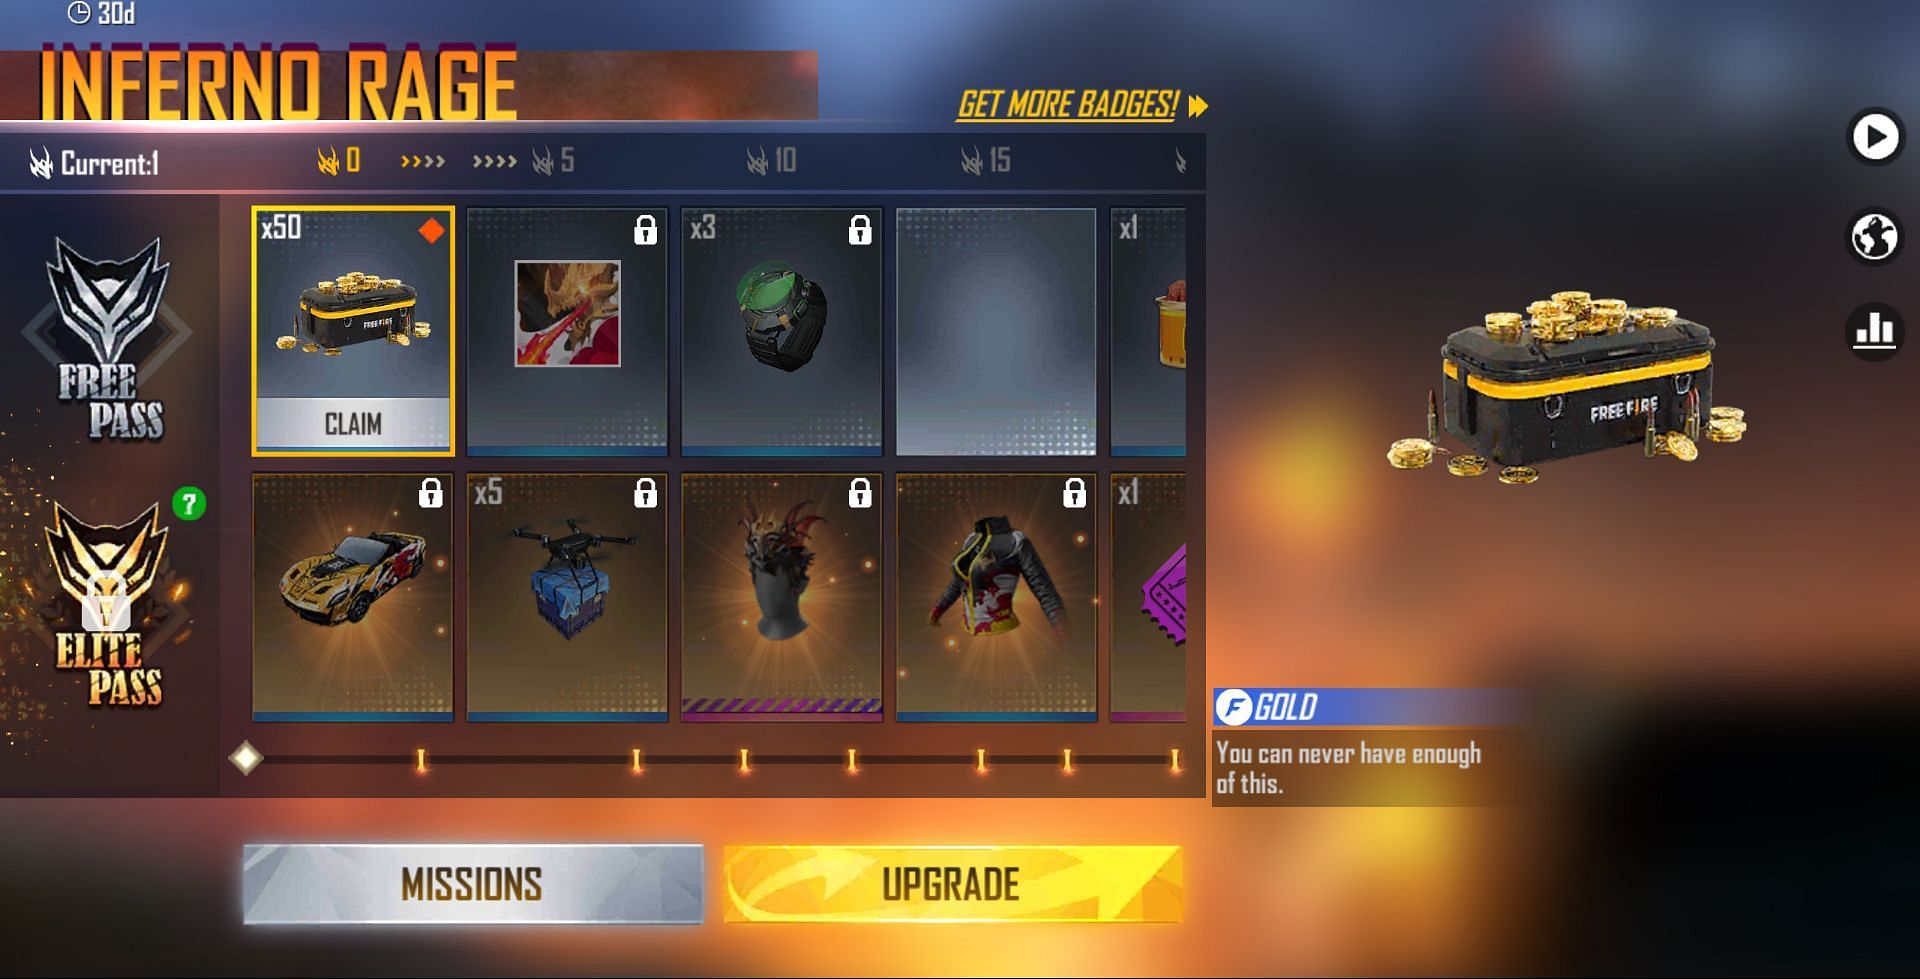 50 Gold will be rewarded to the players at 0 Badges (Image via Free Fire)